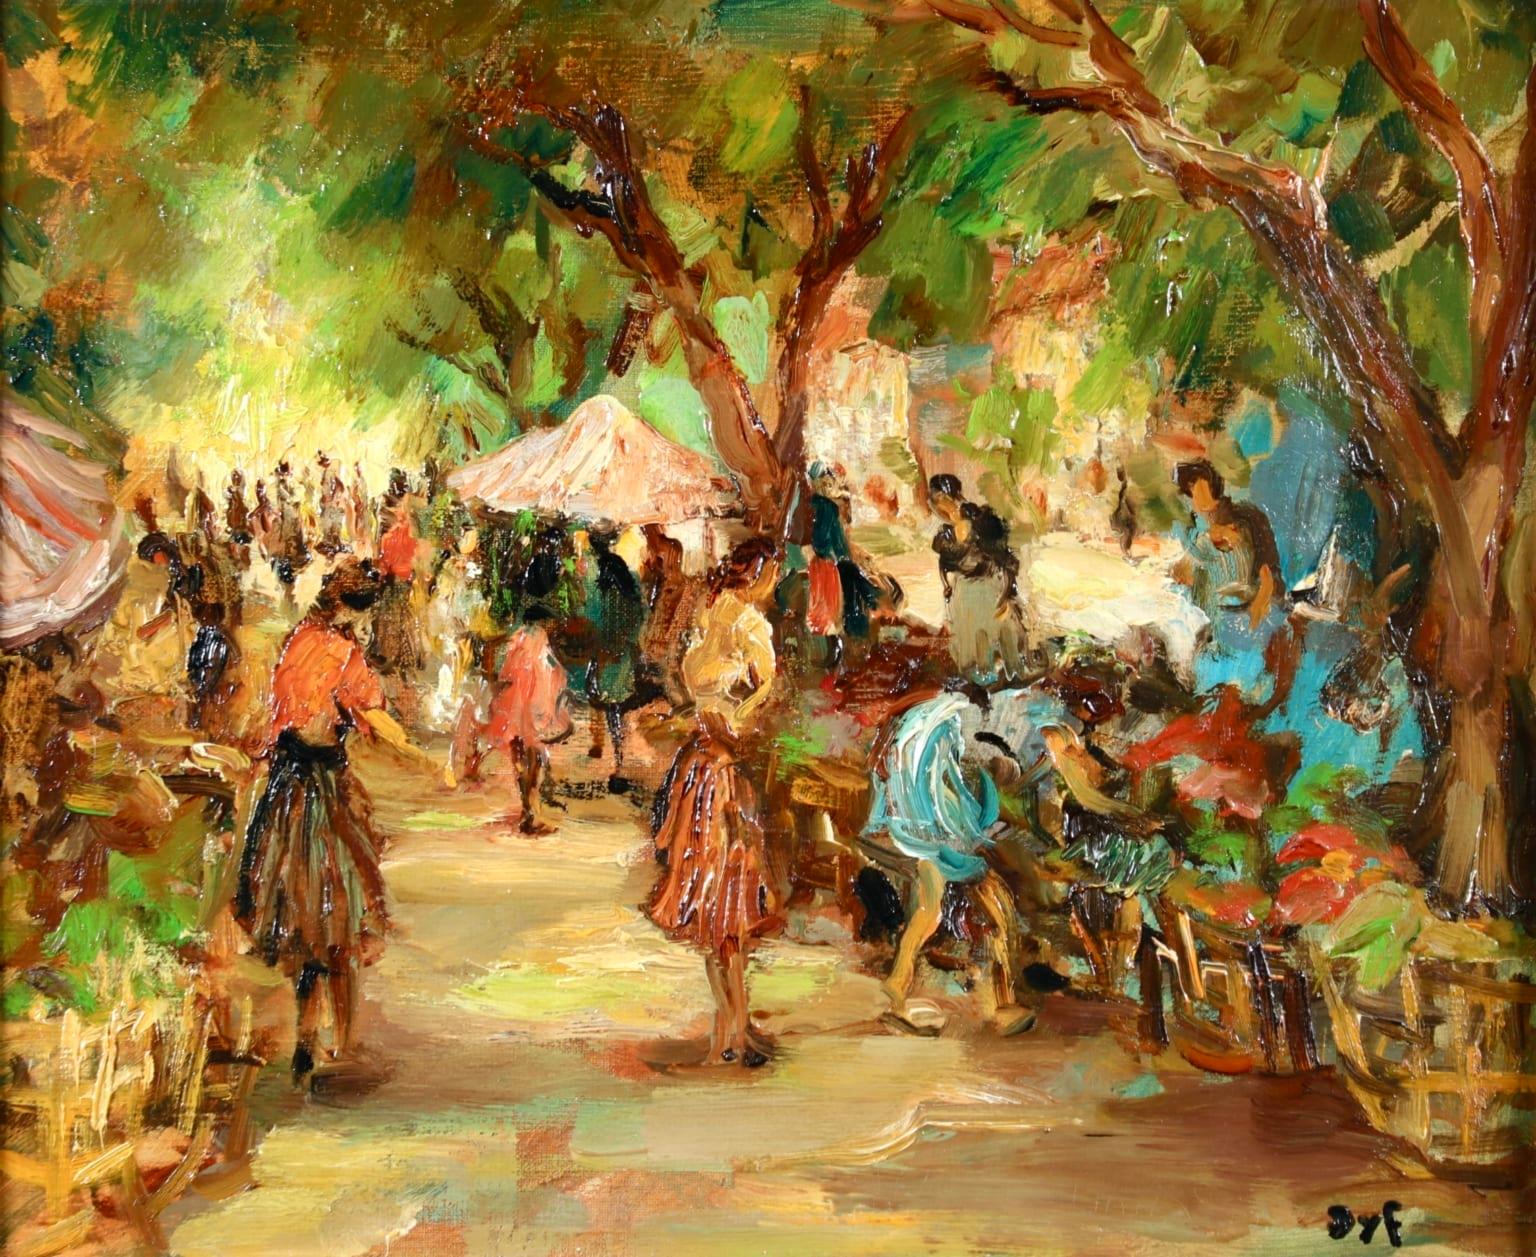 A charming oil on canvas circa 1960 by sought after French post impressionist painter Marcel Dyf depicting women at a flower market in Arles, France. The stalls are shaded by the long row of trees.

Signature:
Signed lower